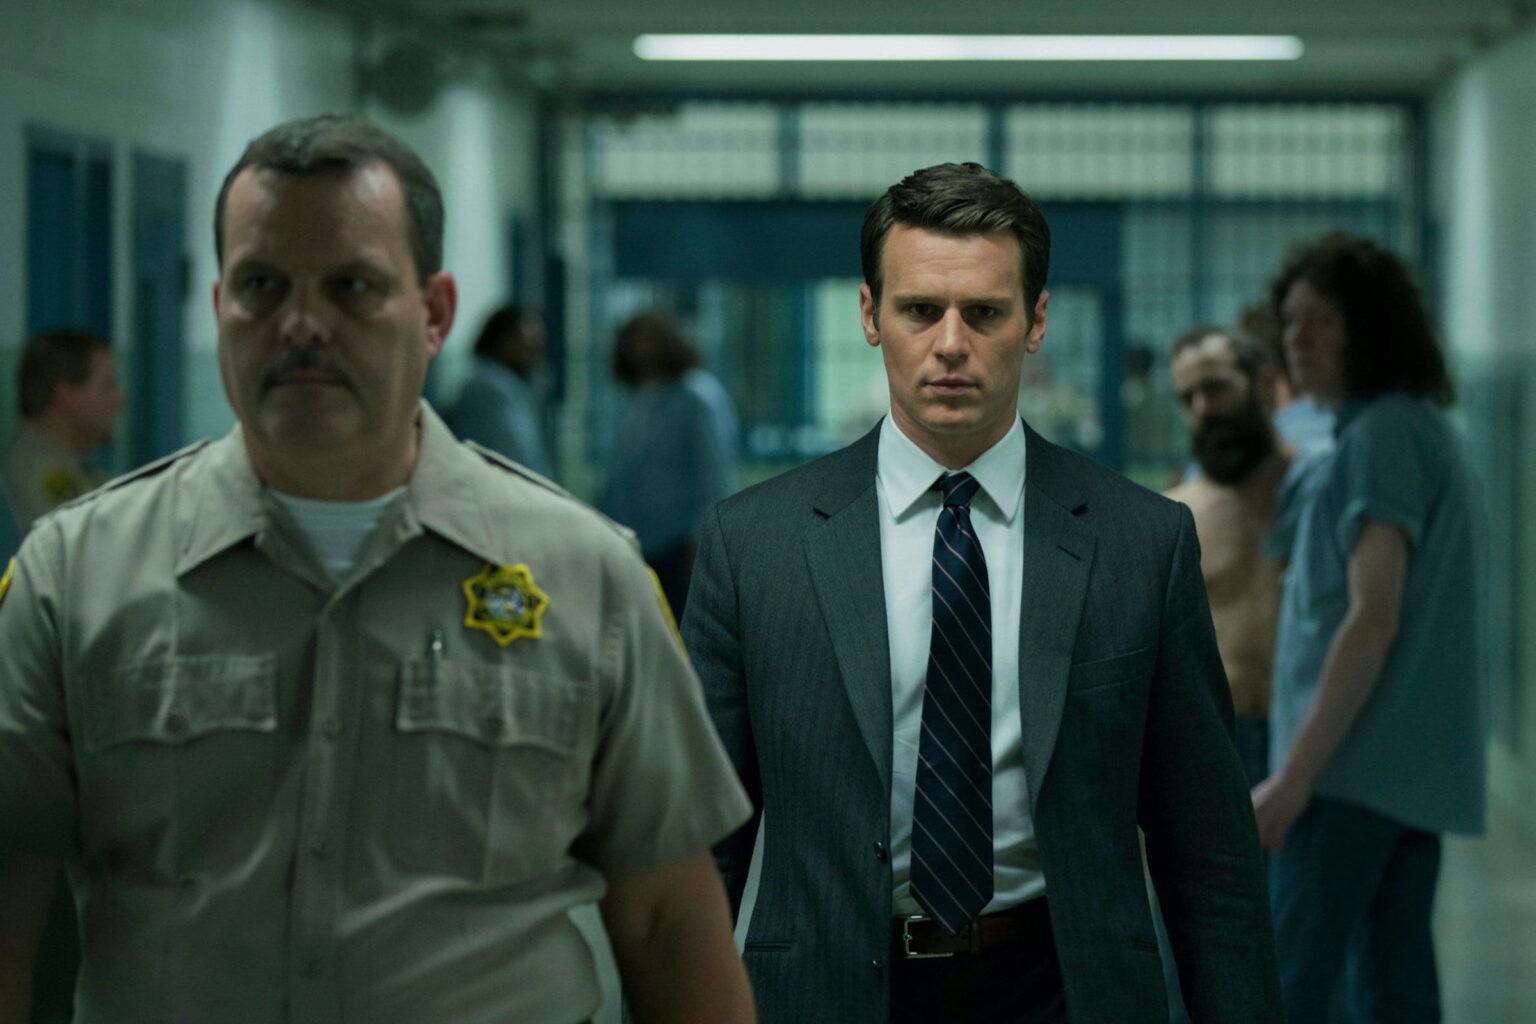 Although director David Fincher remains unconvinced about creating a new season of 'Mindhunter', director Asif Kapadia seems hopeful for the Netflix series.